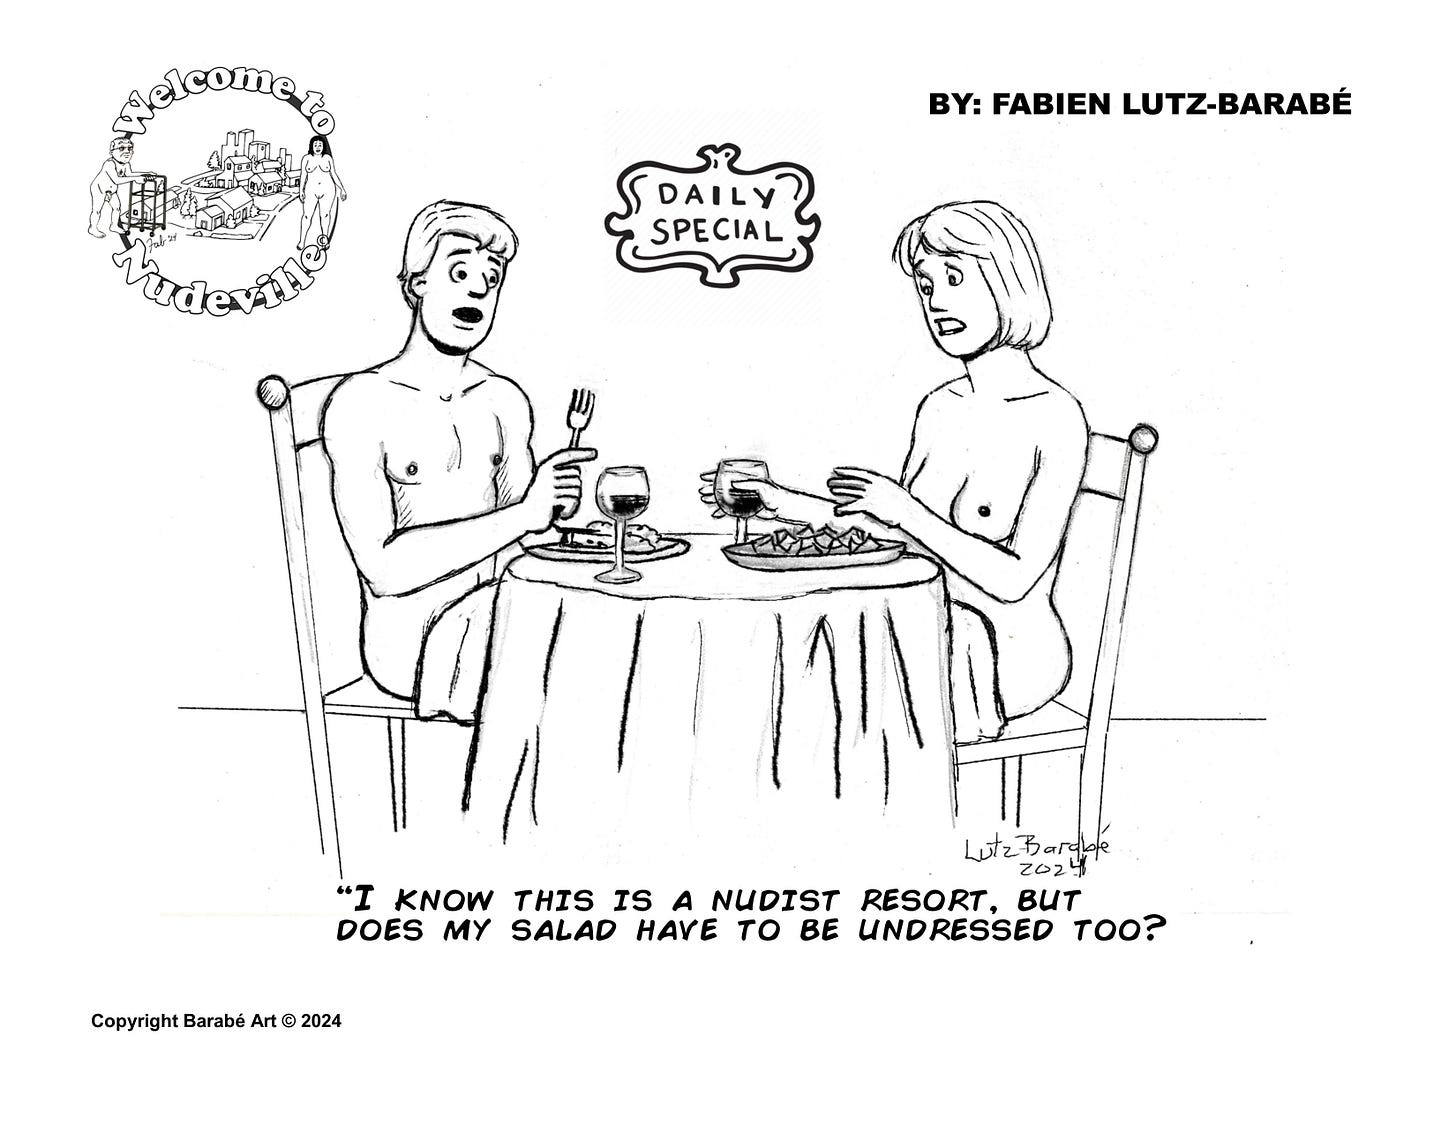 Welcome to Nudeville byt Fabien Lutz Barabé, "Daily Special". Single panel. A man and woman sit at a dining table, looking a little shocked. Caption: "I know this is a nudist resort, but does my sadal have to be undressed too?"